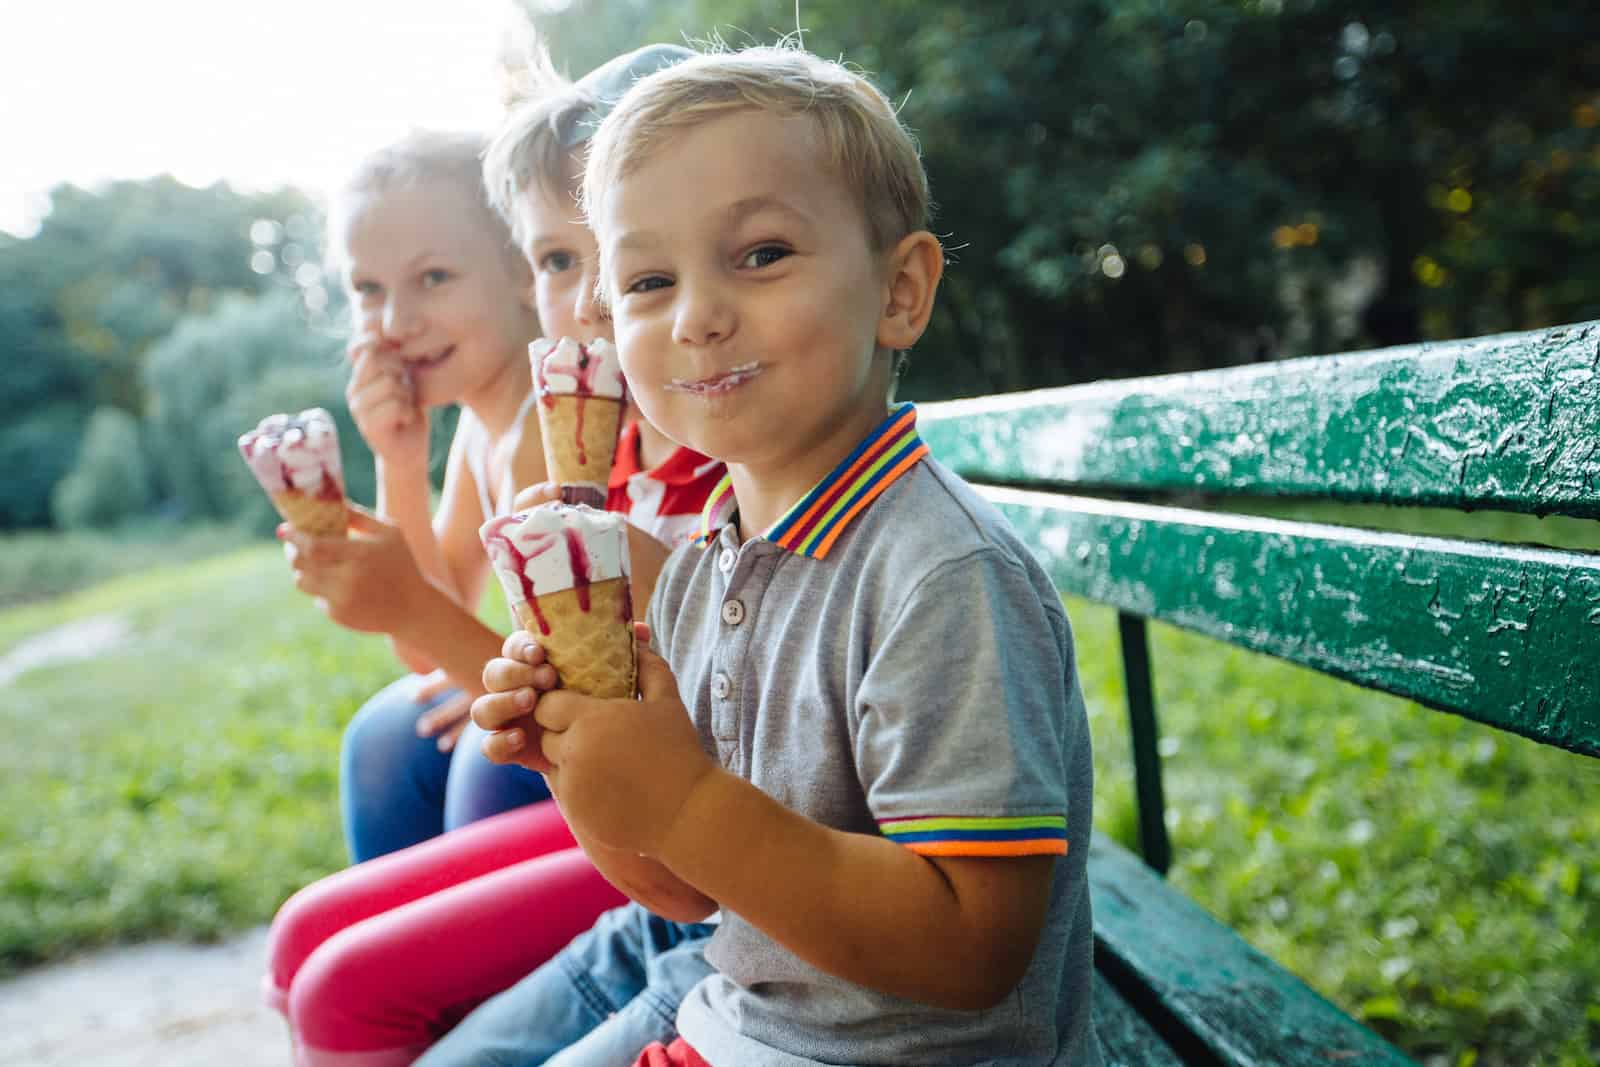 Family tradition examples can include getting ice cream to celebrate the first day of summer or the last day of school